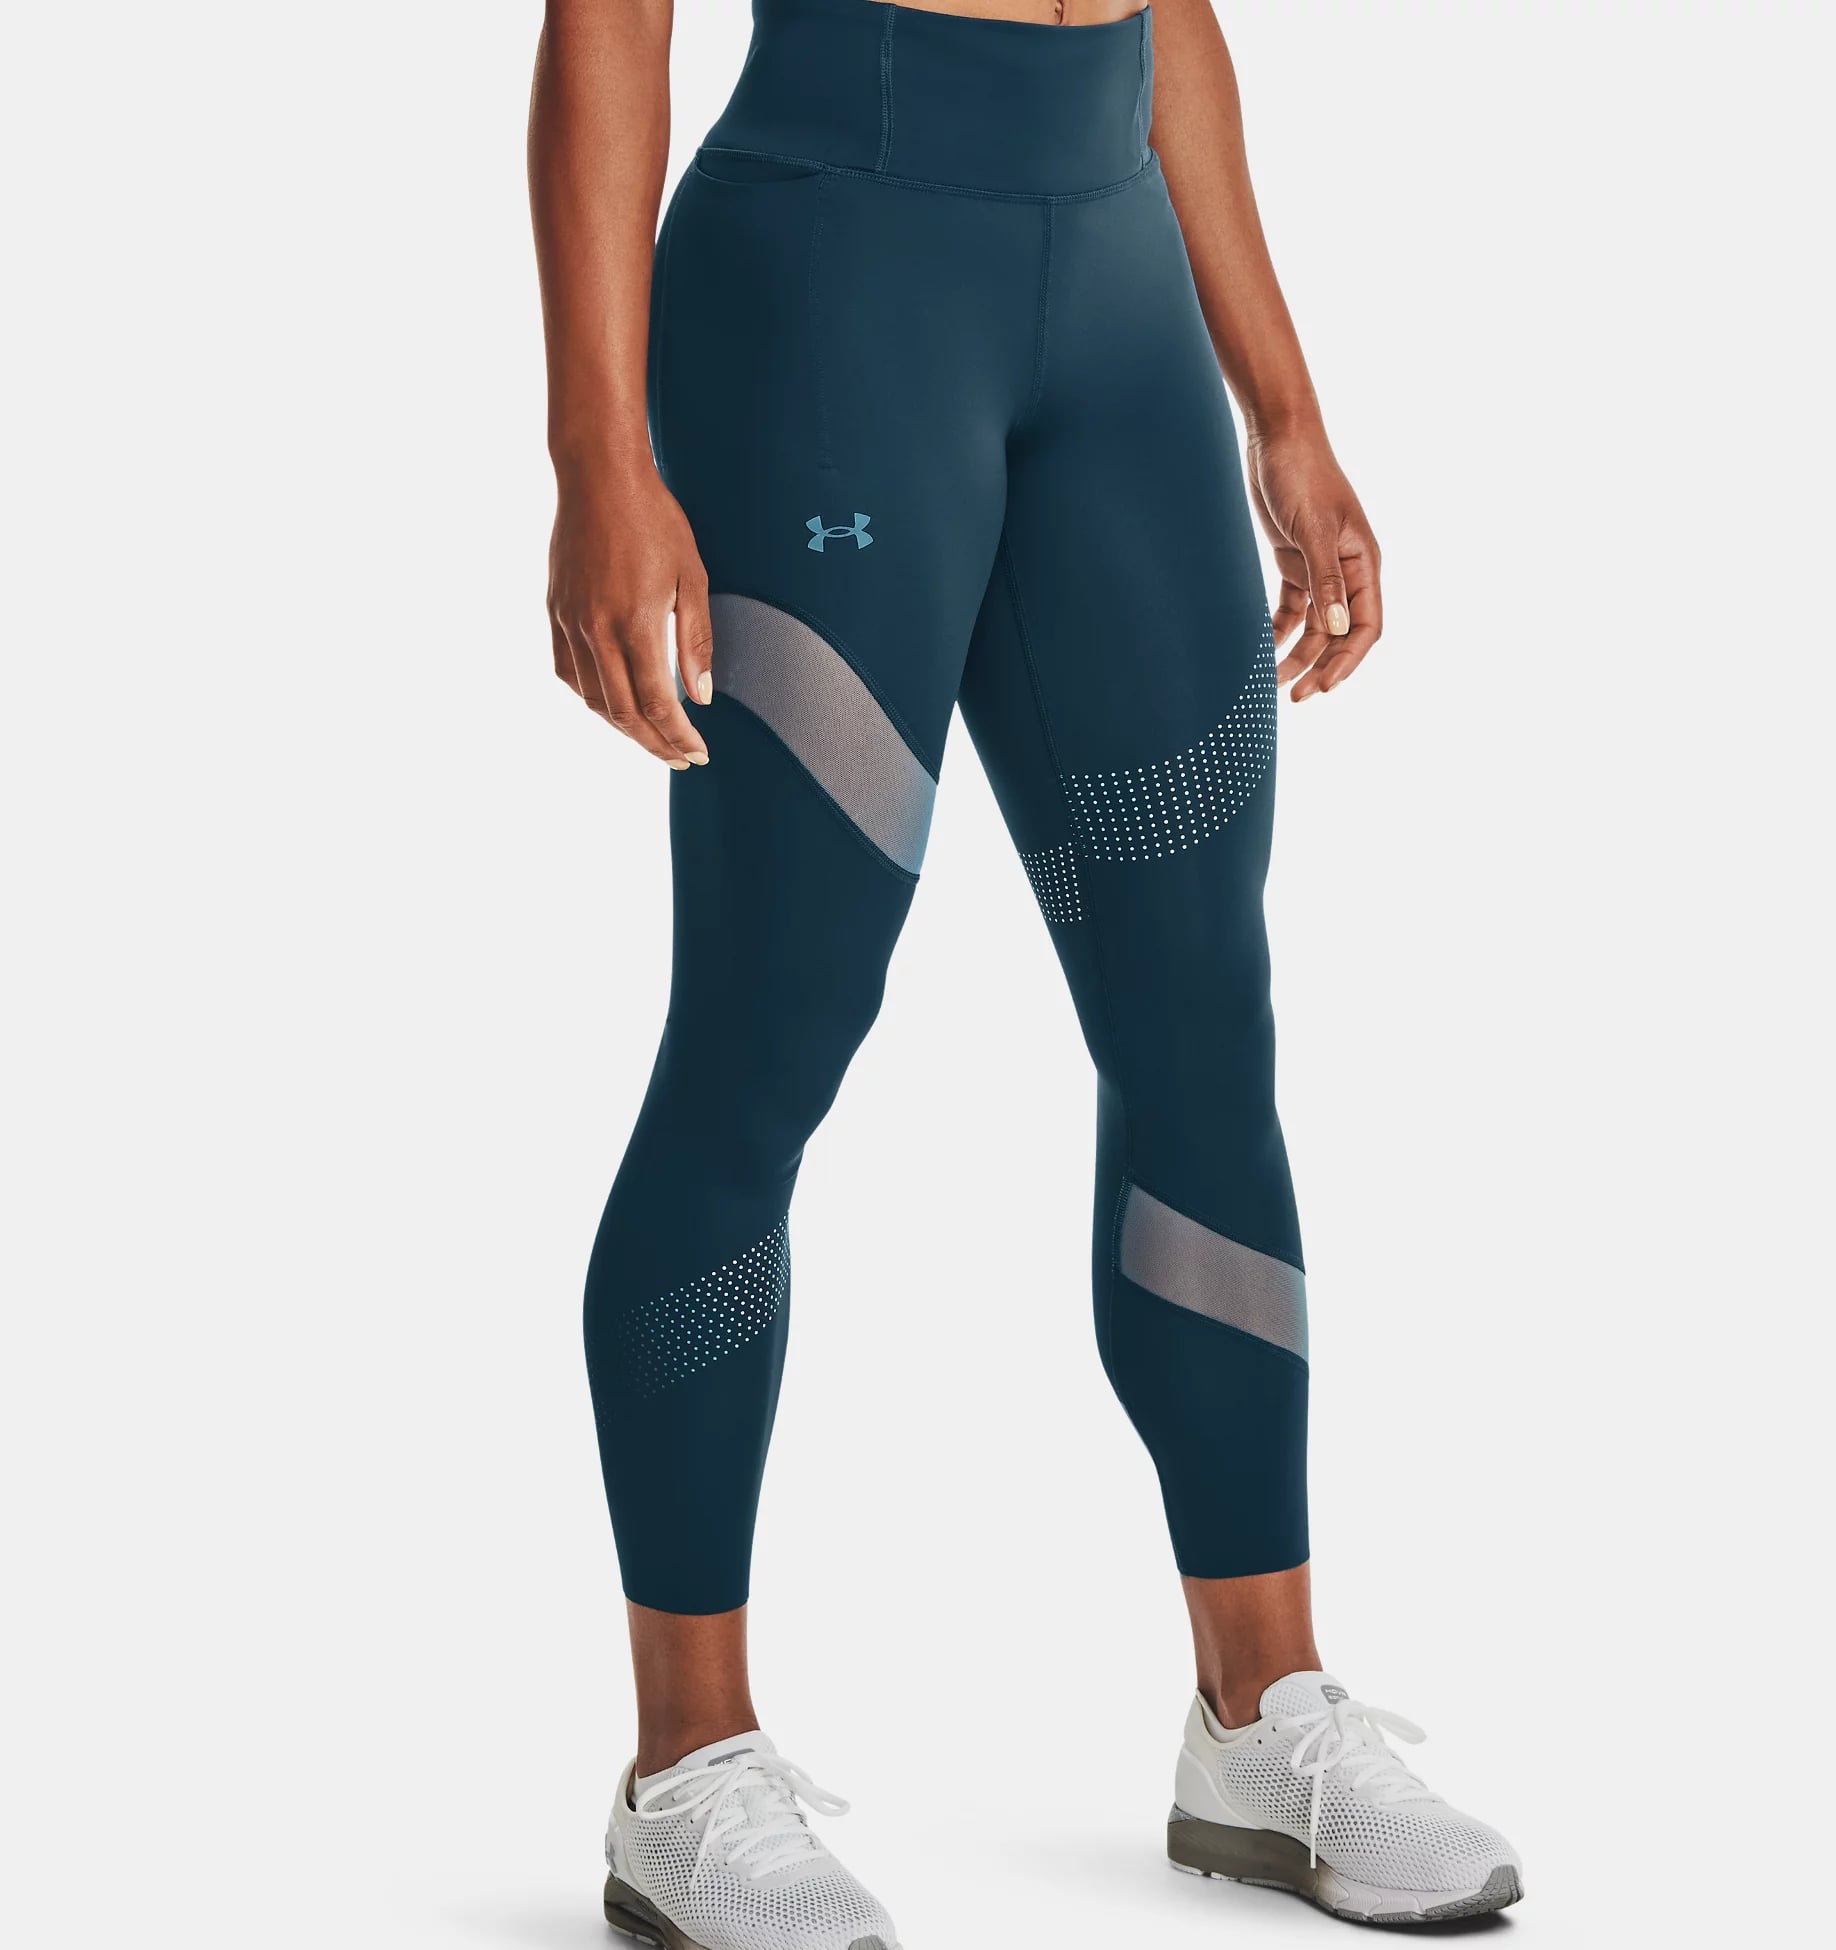 Shop Under Armor Leggings For Women with great discounts and